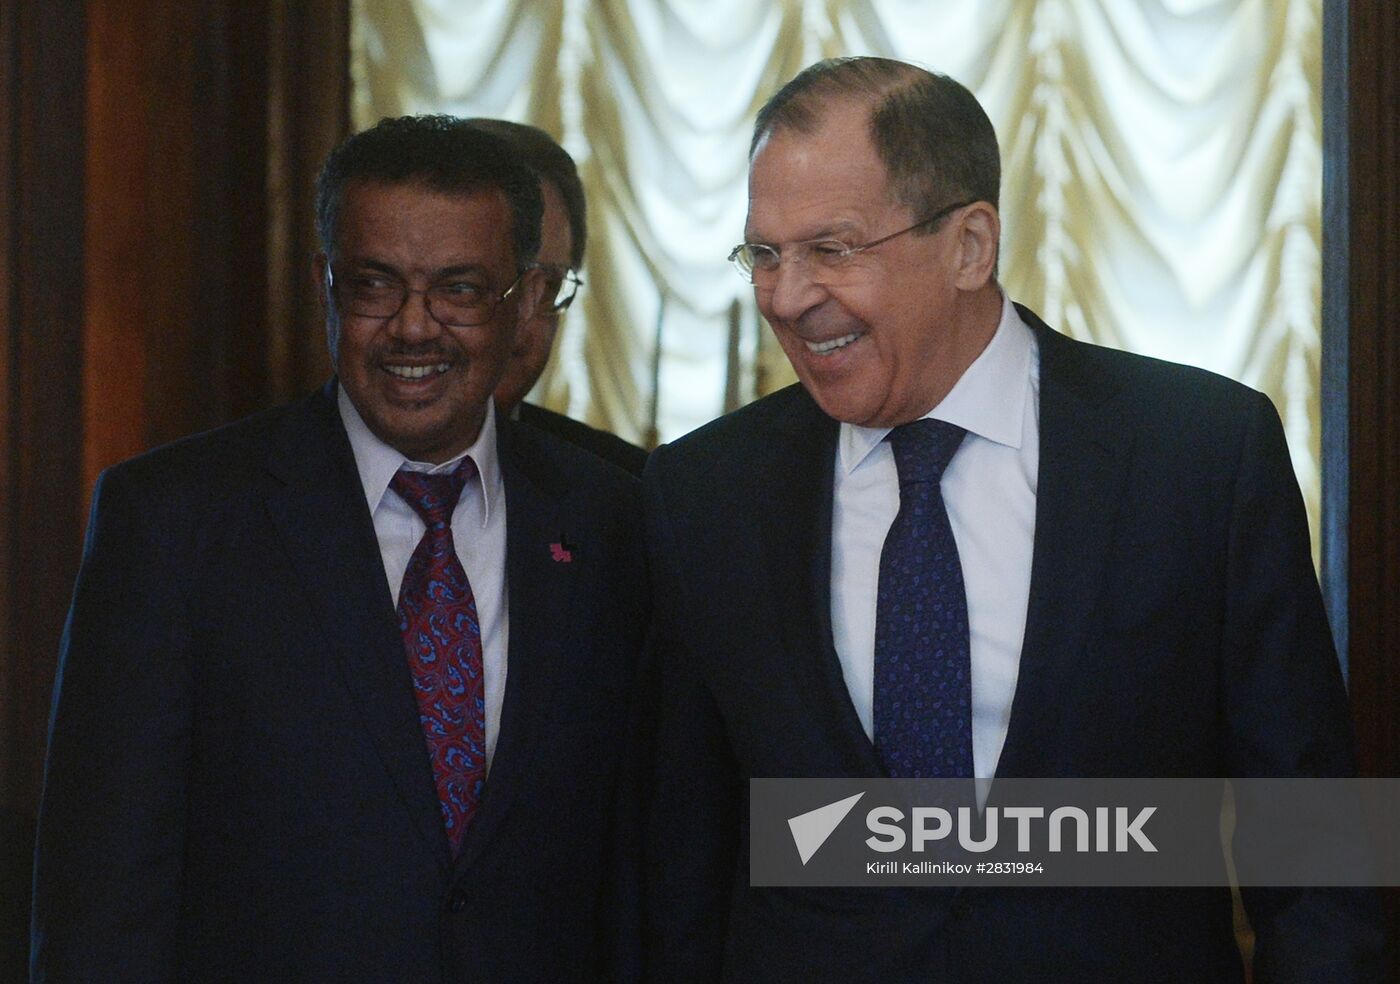 Russian Foreign Minister Sergei Lavrov meets with his Ethiopian counterpart Tedros Adhanom